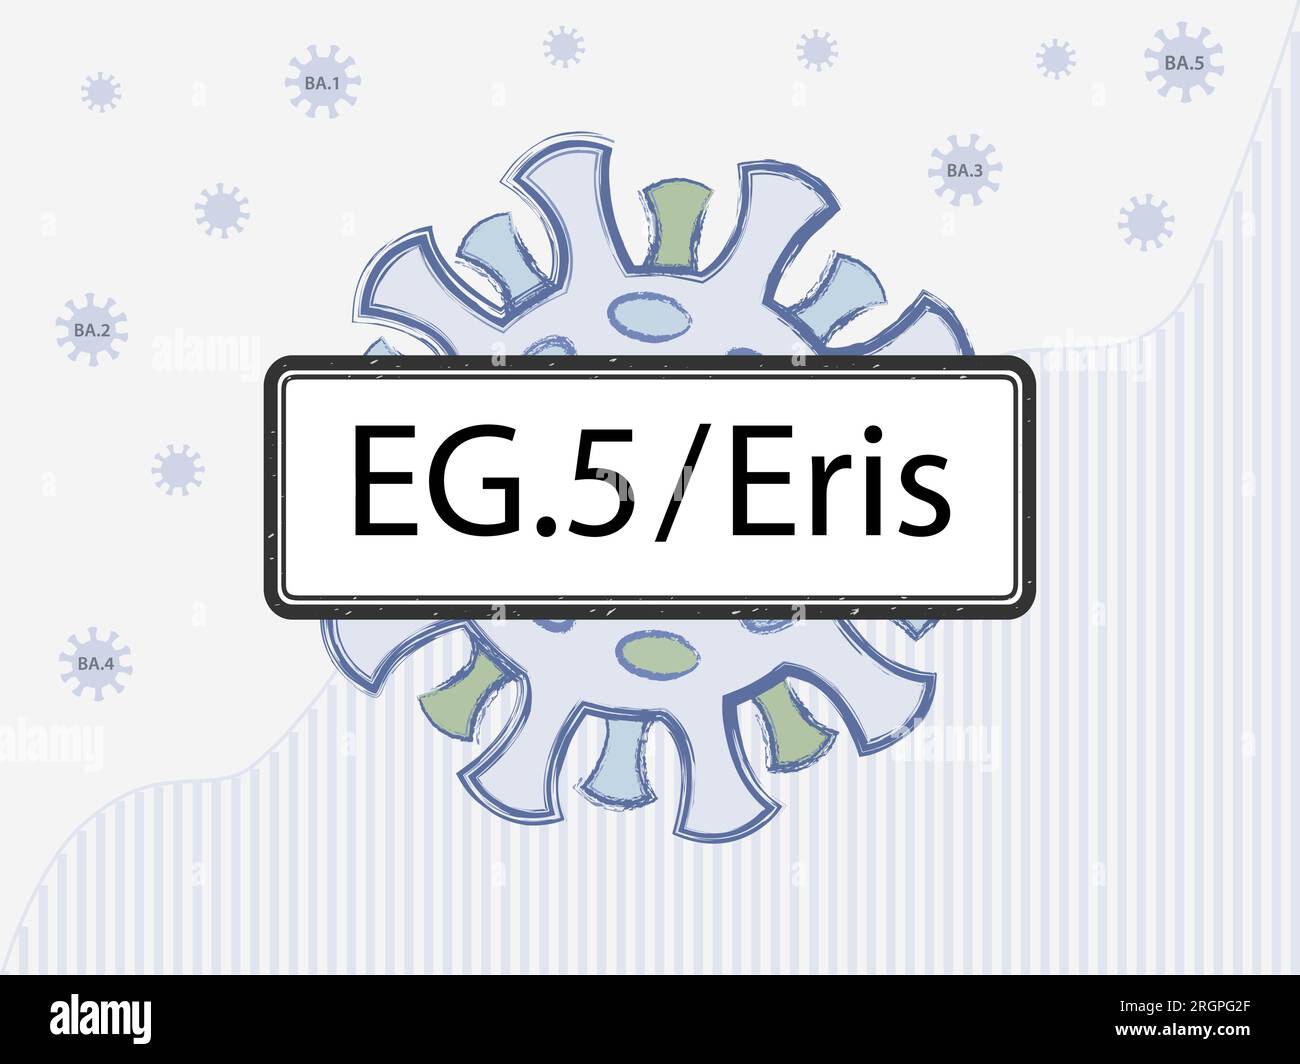 EG.5 / Eris in the sign. Coronovirus with spike proteins of a different color symbolizing mutations. New Omicron subvariant against the statistics. Stock Vector